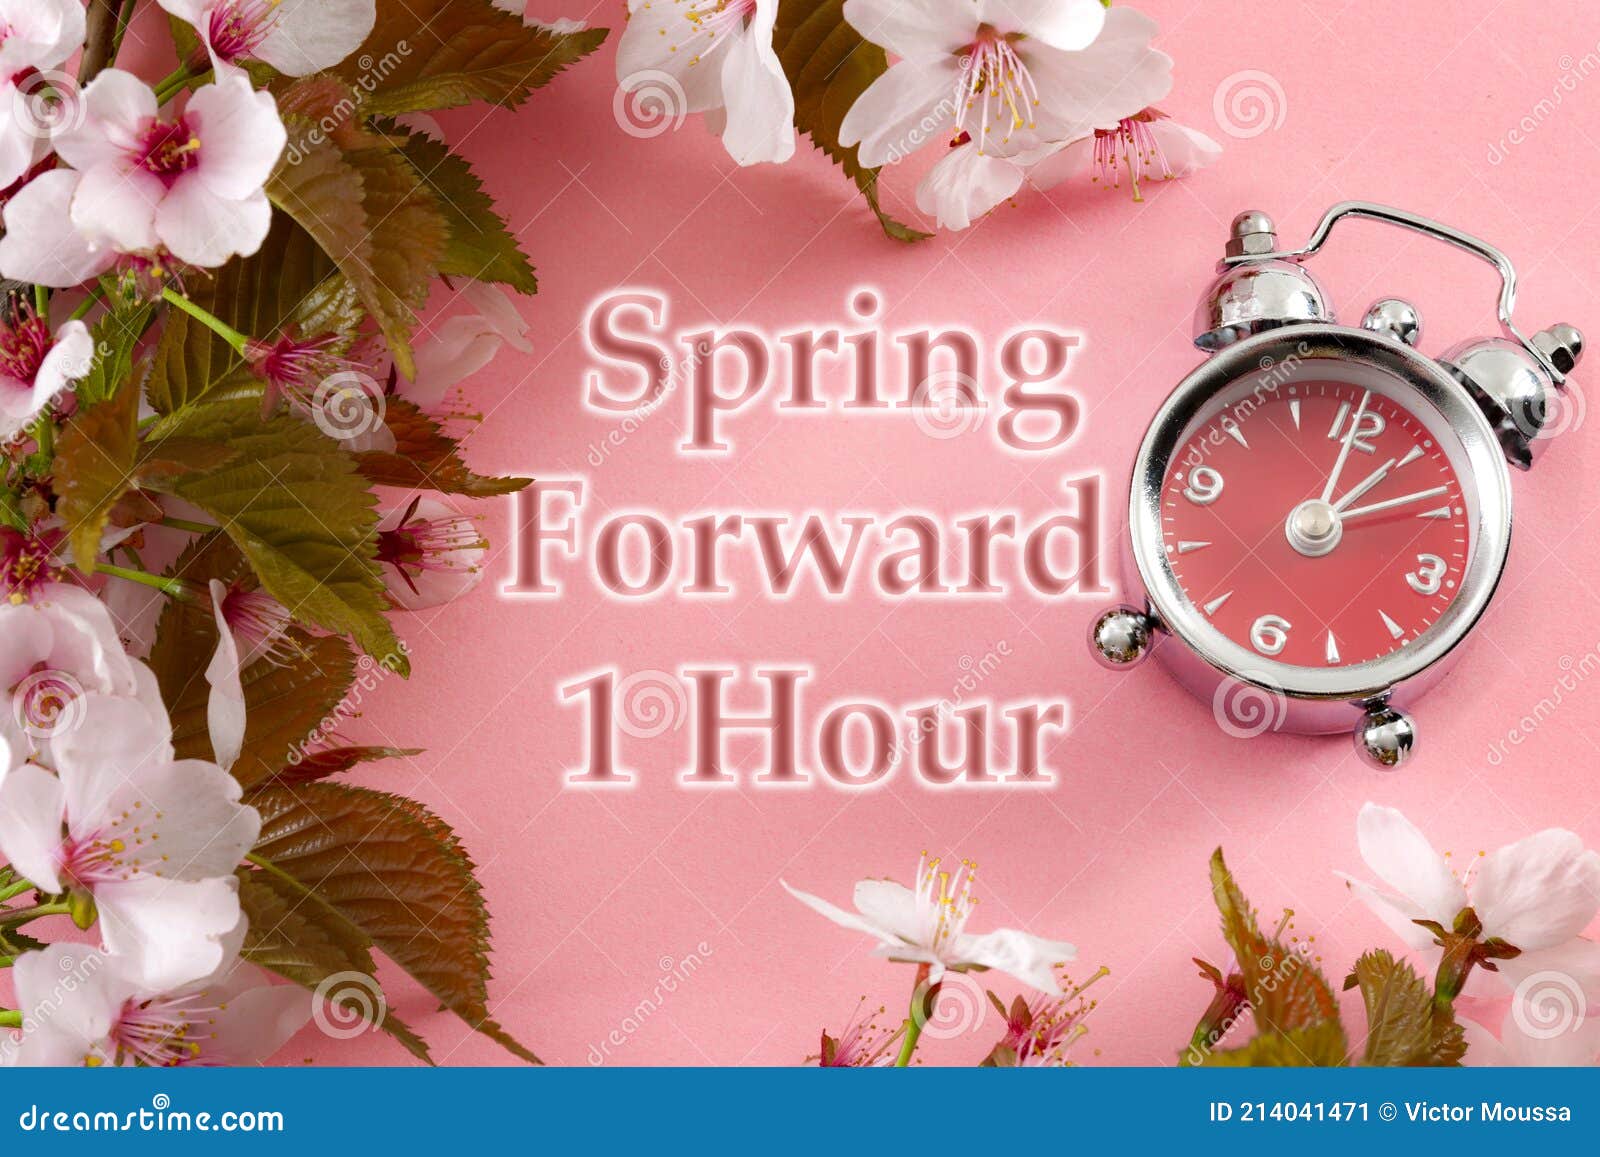 Turn clocks on hour ahead, star of daylight savings time change and reminder to spring forward concept with clock on pink